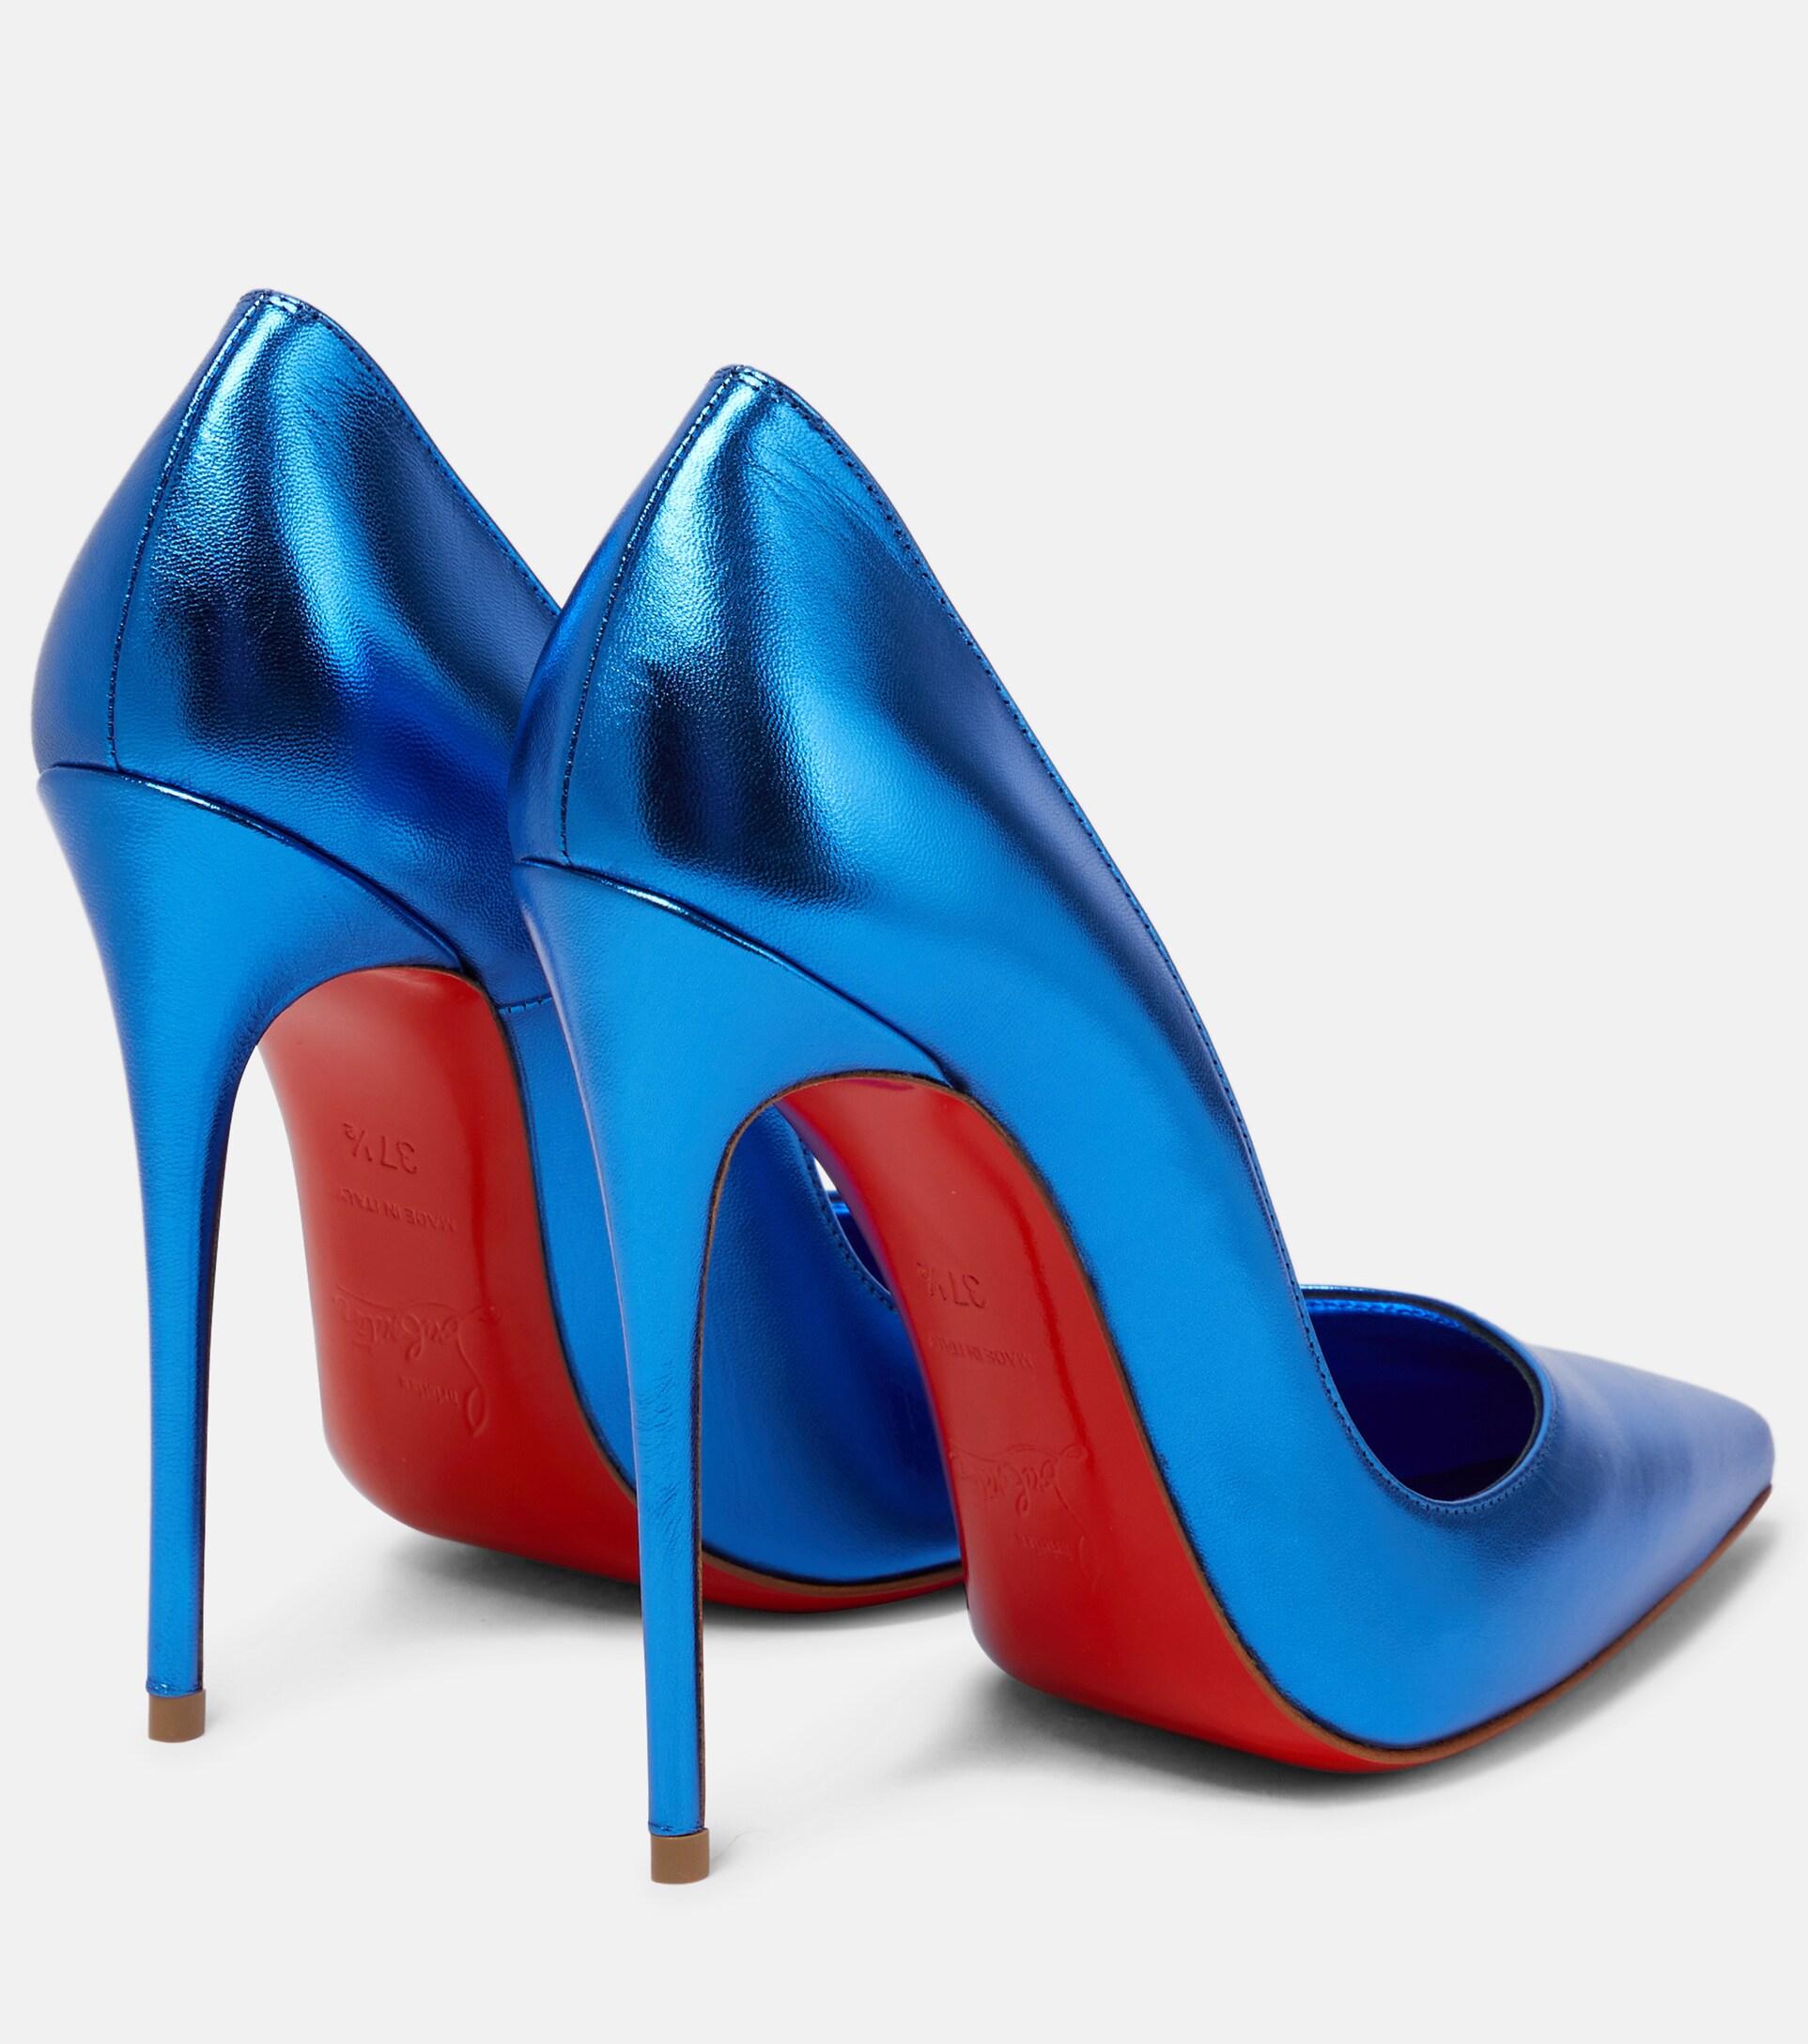 CHRISTIAN LOUBOUTIN: Astrida pumps in suede - Blue  Christian Louboutin  high heel shoes 3230712 online at